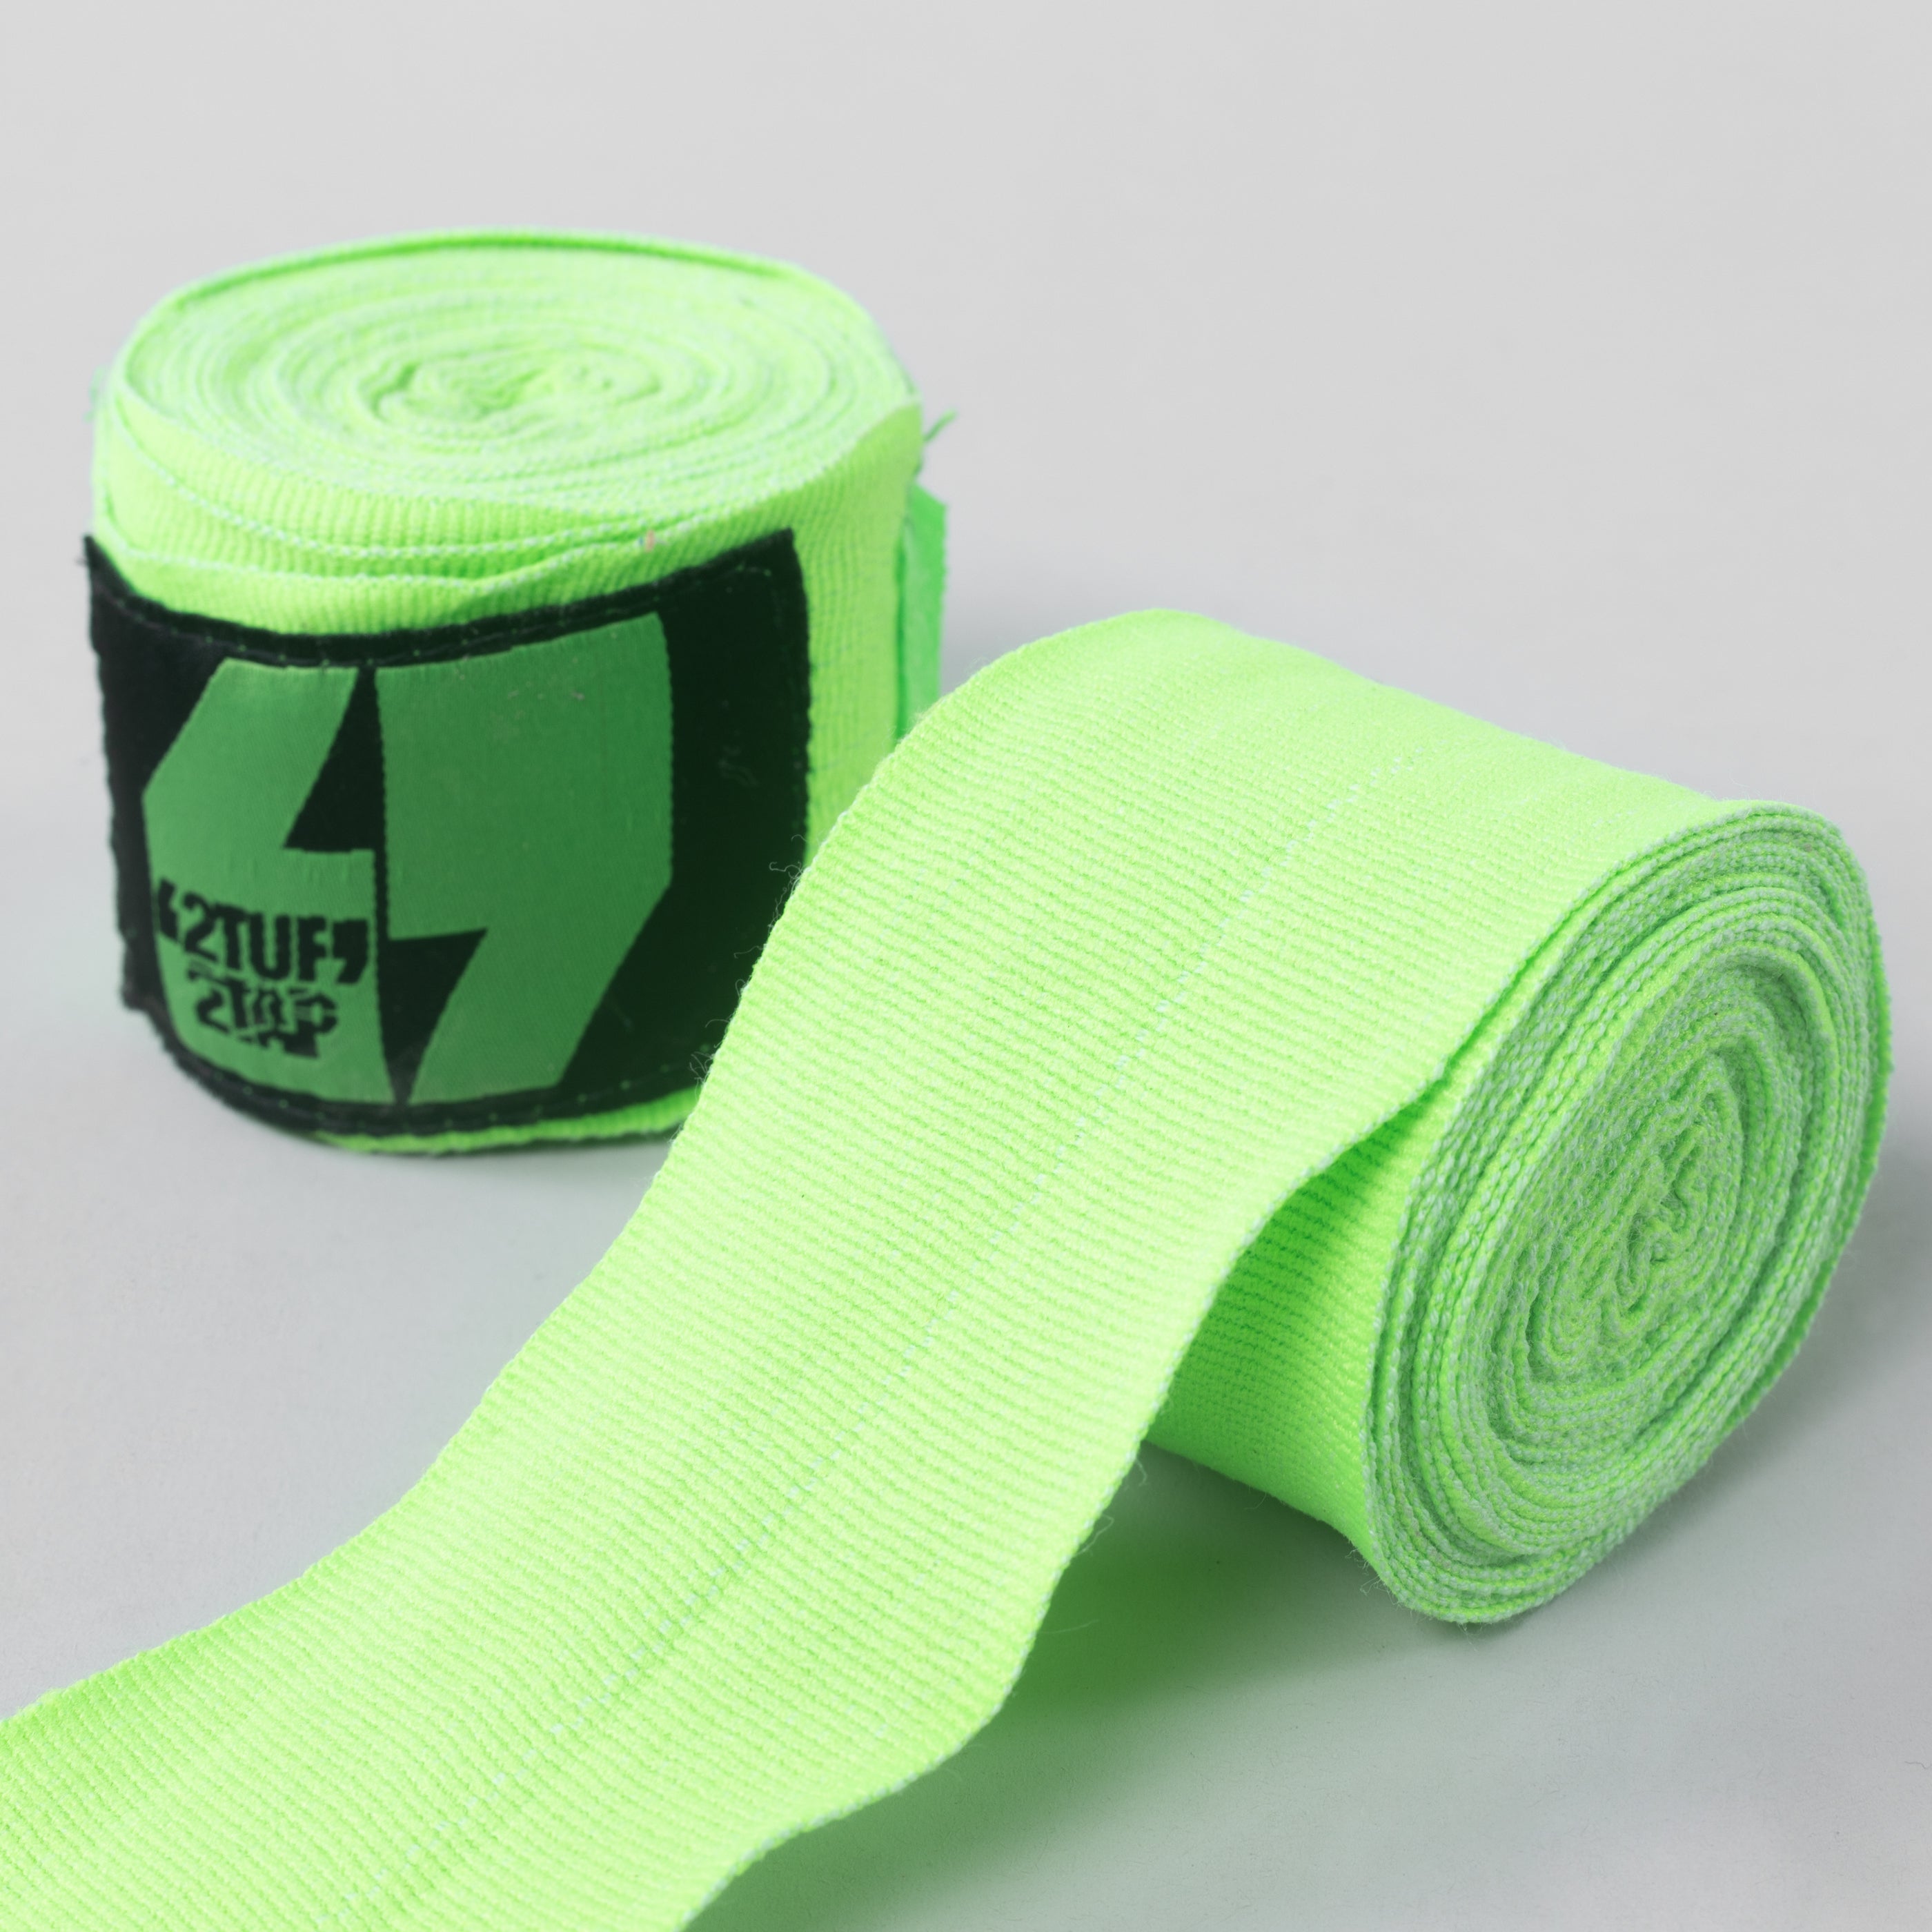 'Strykr' Boxing Hand Wraps - Green/Black 2TUF2TAP